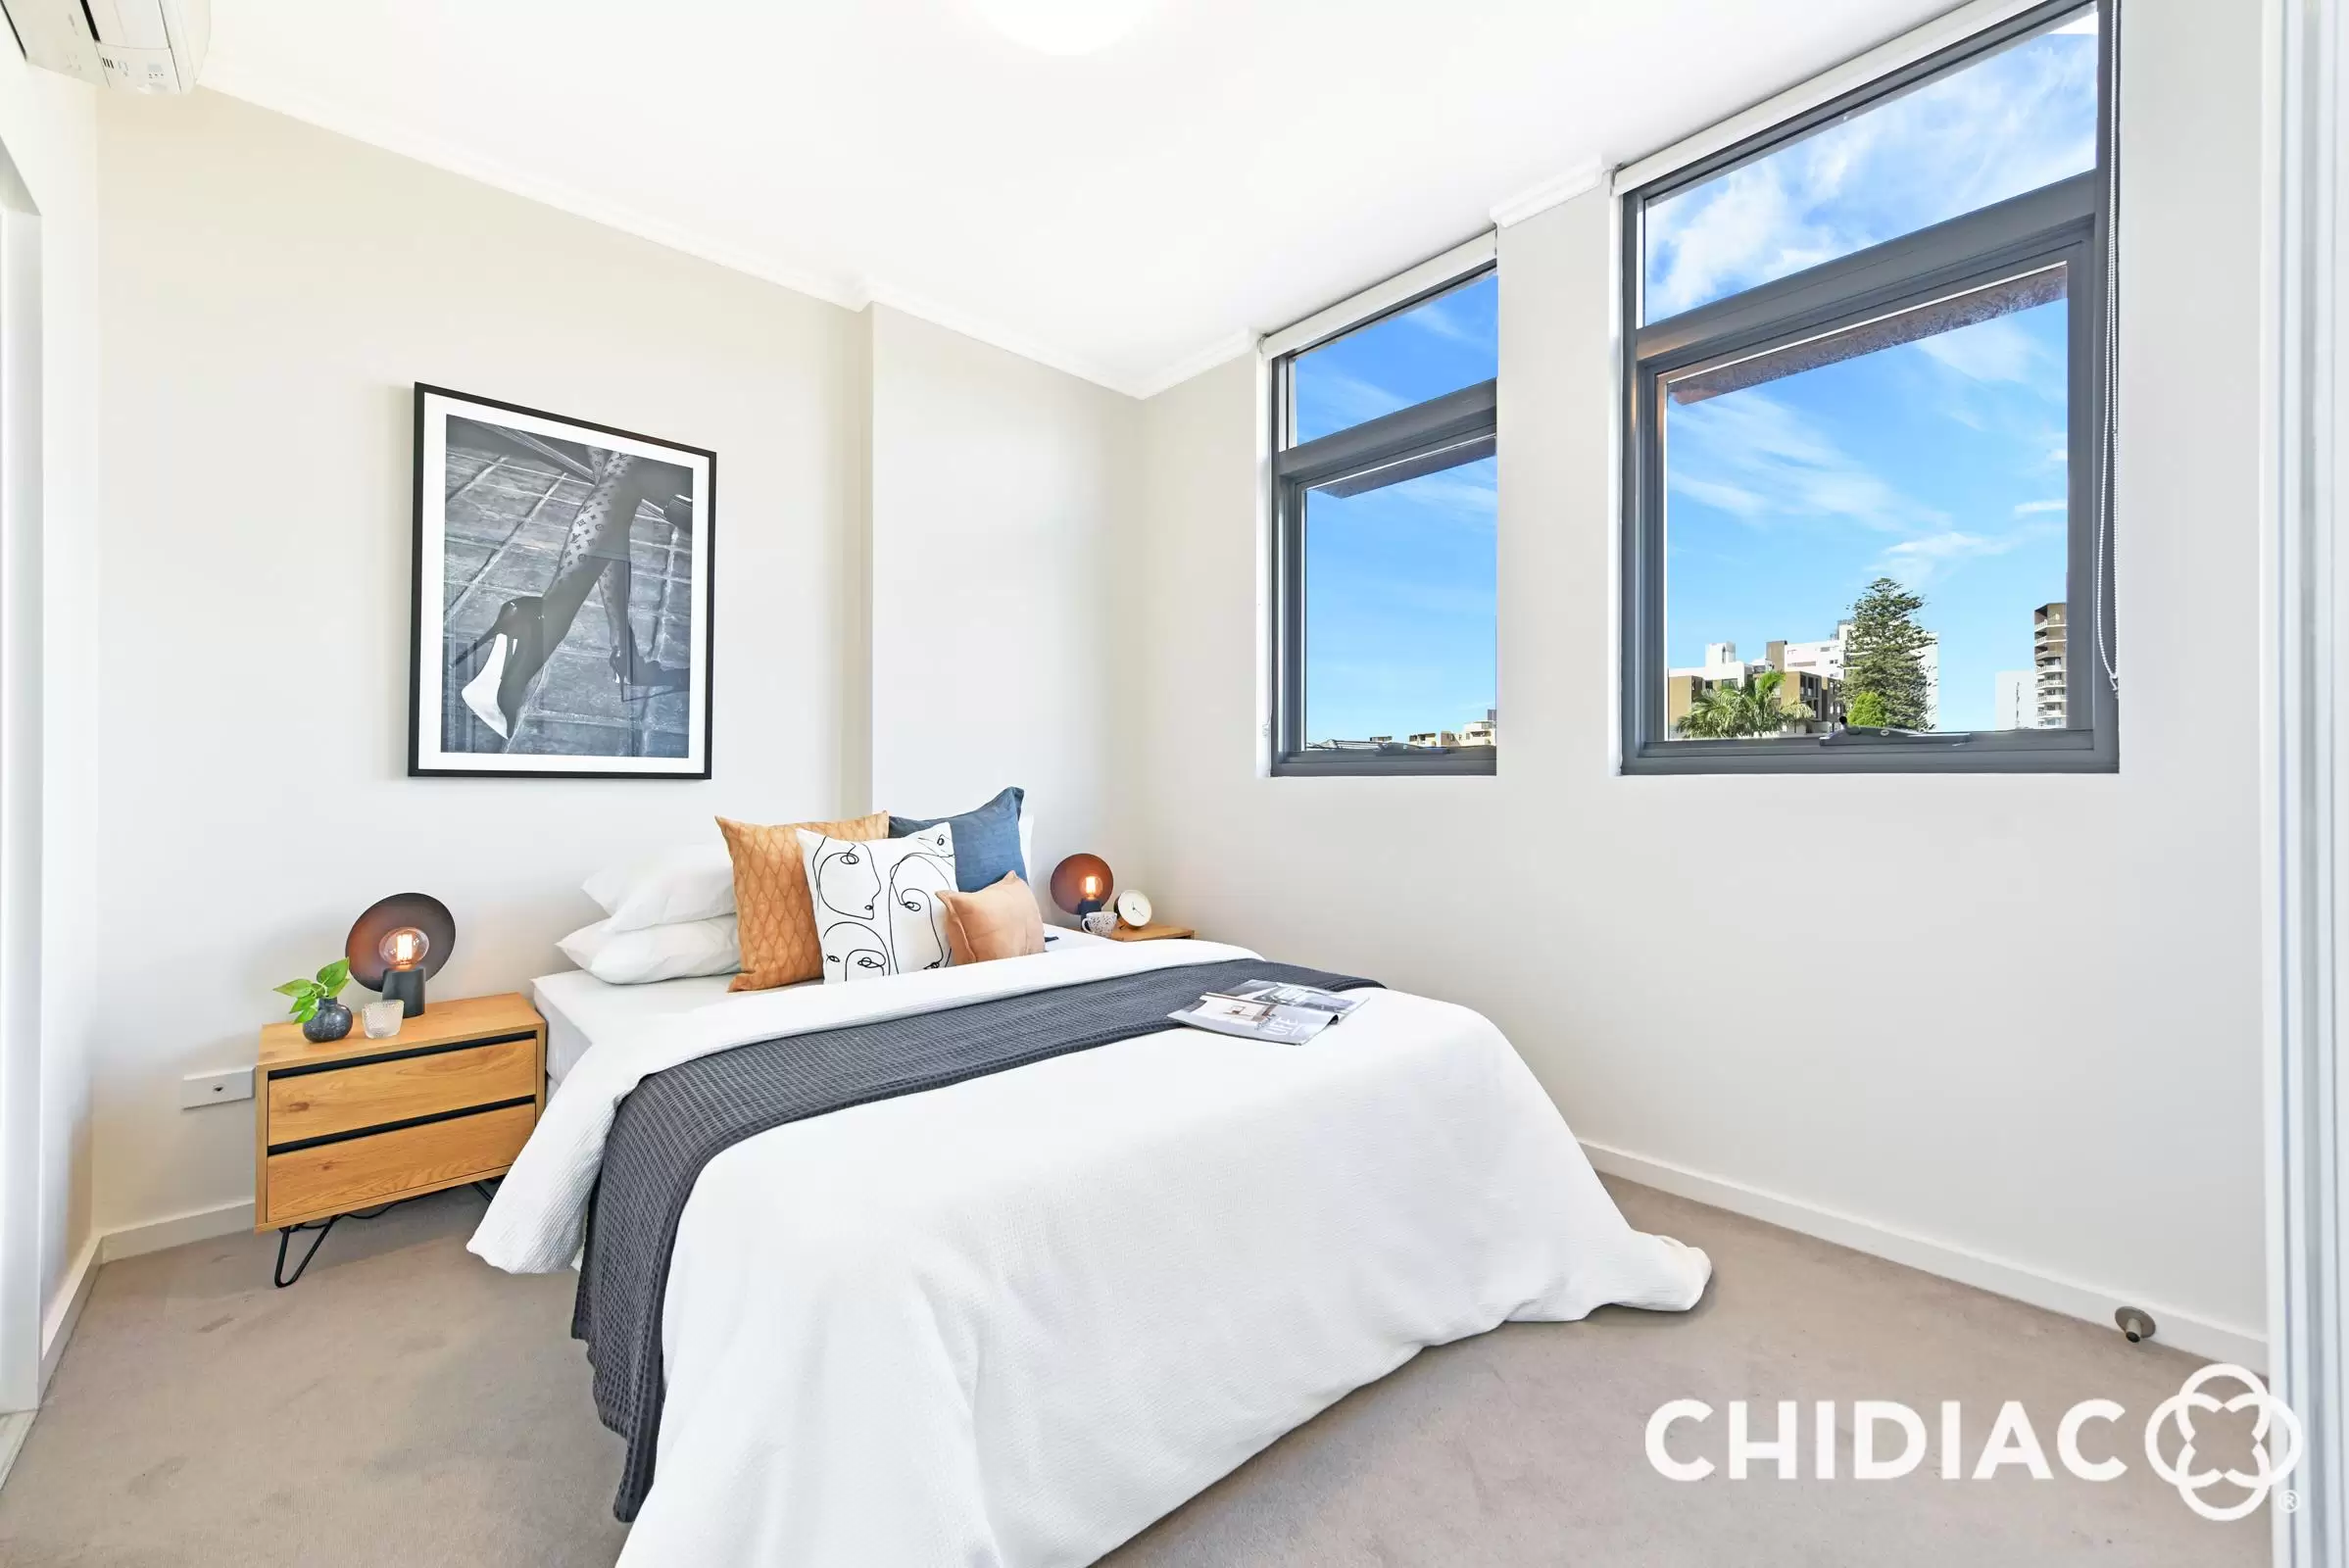 14/9 Carilla Street, Burwood Leased by Chidiac Realty - image 3